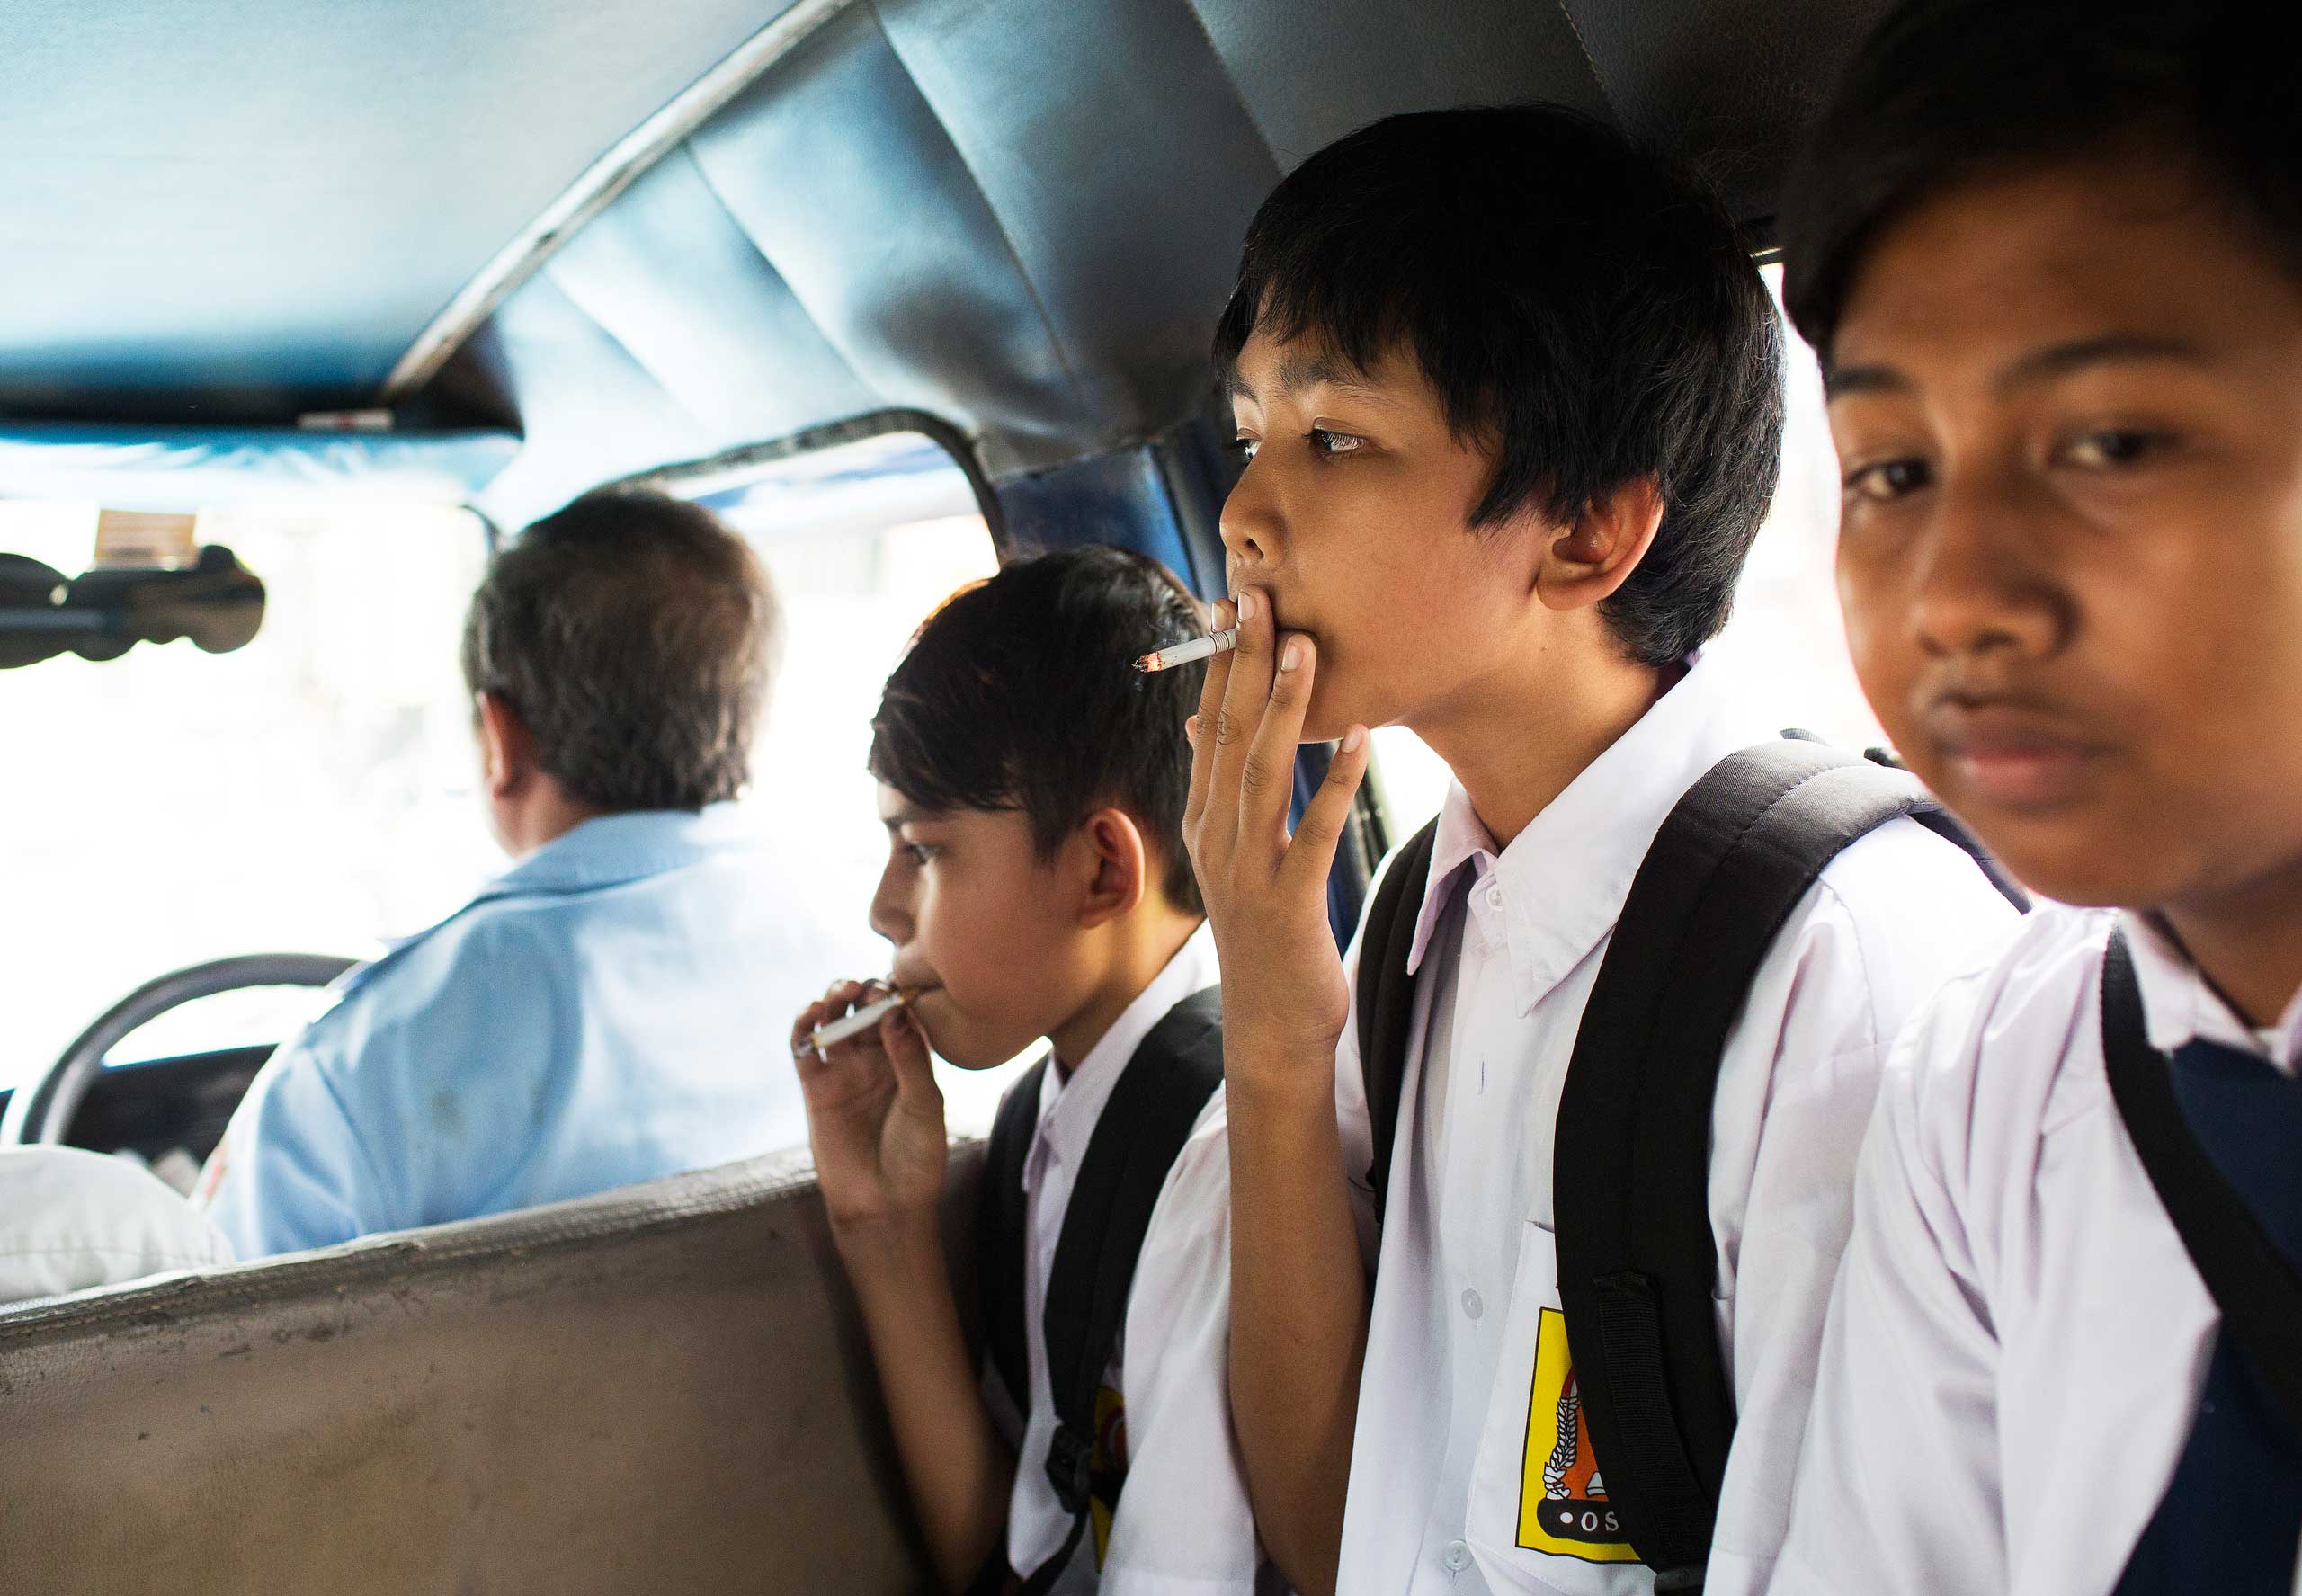 Children smoke on a public bus home from school on February 12, 2014 in Jakarta, Indonesia. Although there are smoking regulations in public places there is a lack of enforcement.